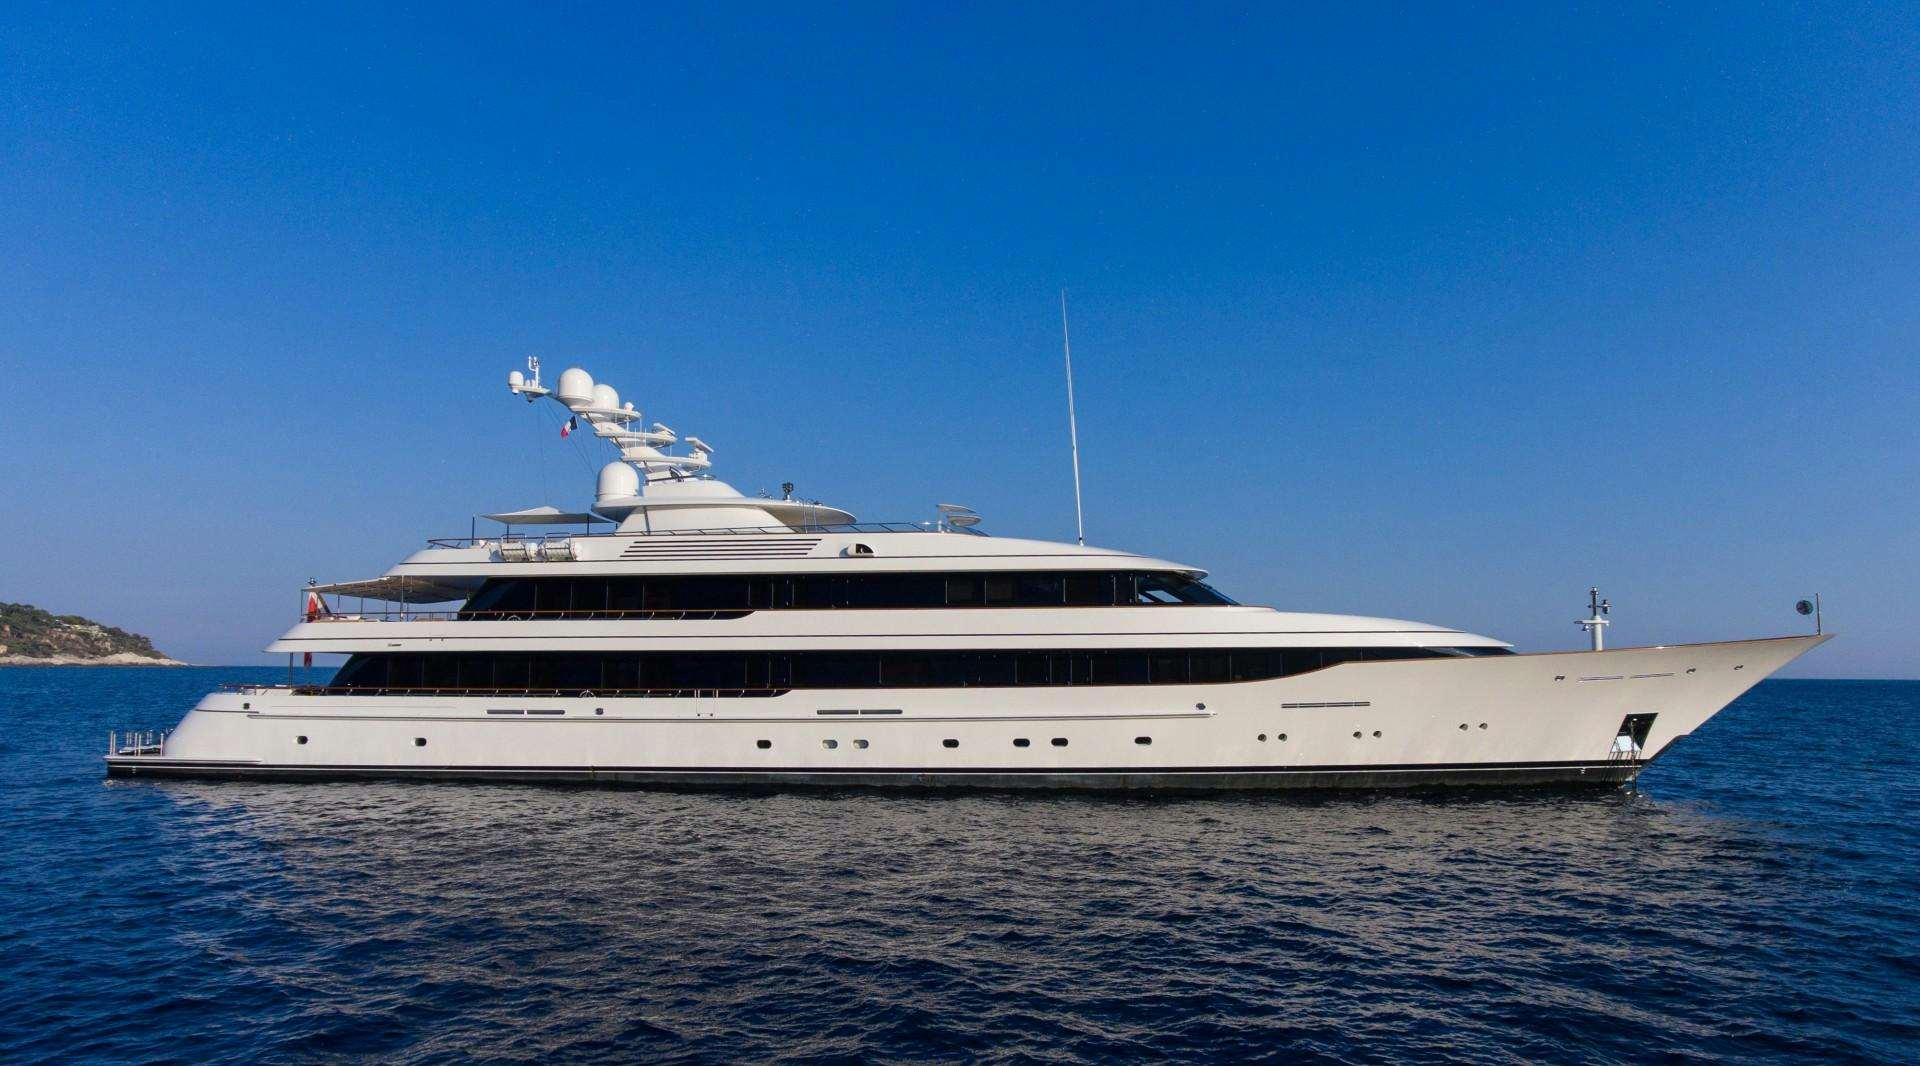 Best Feadship Yachts for sale, Feadship Boats for Sale